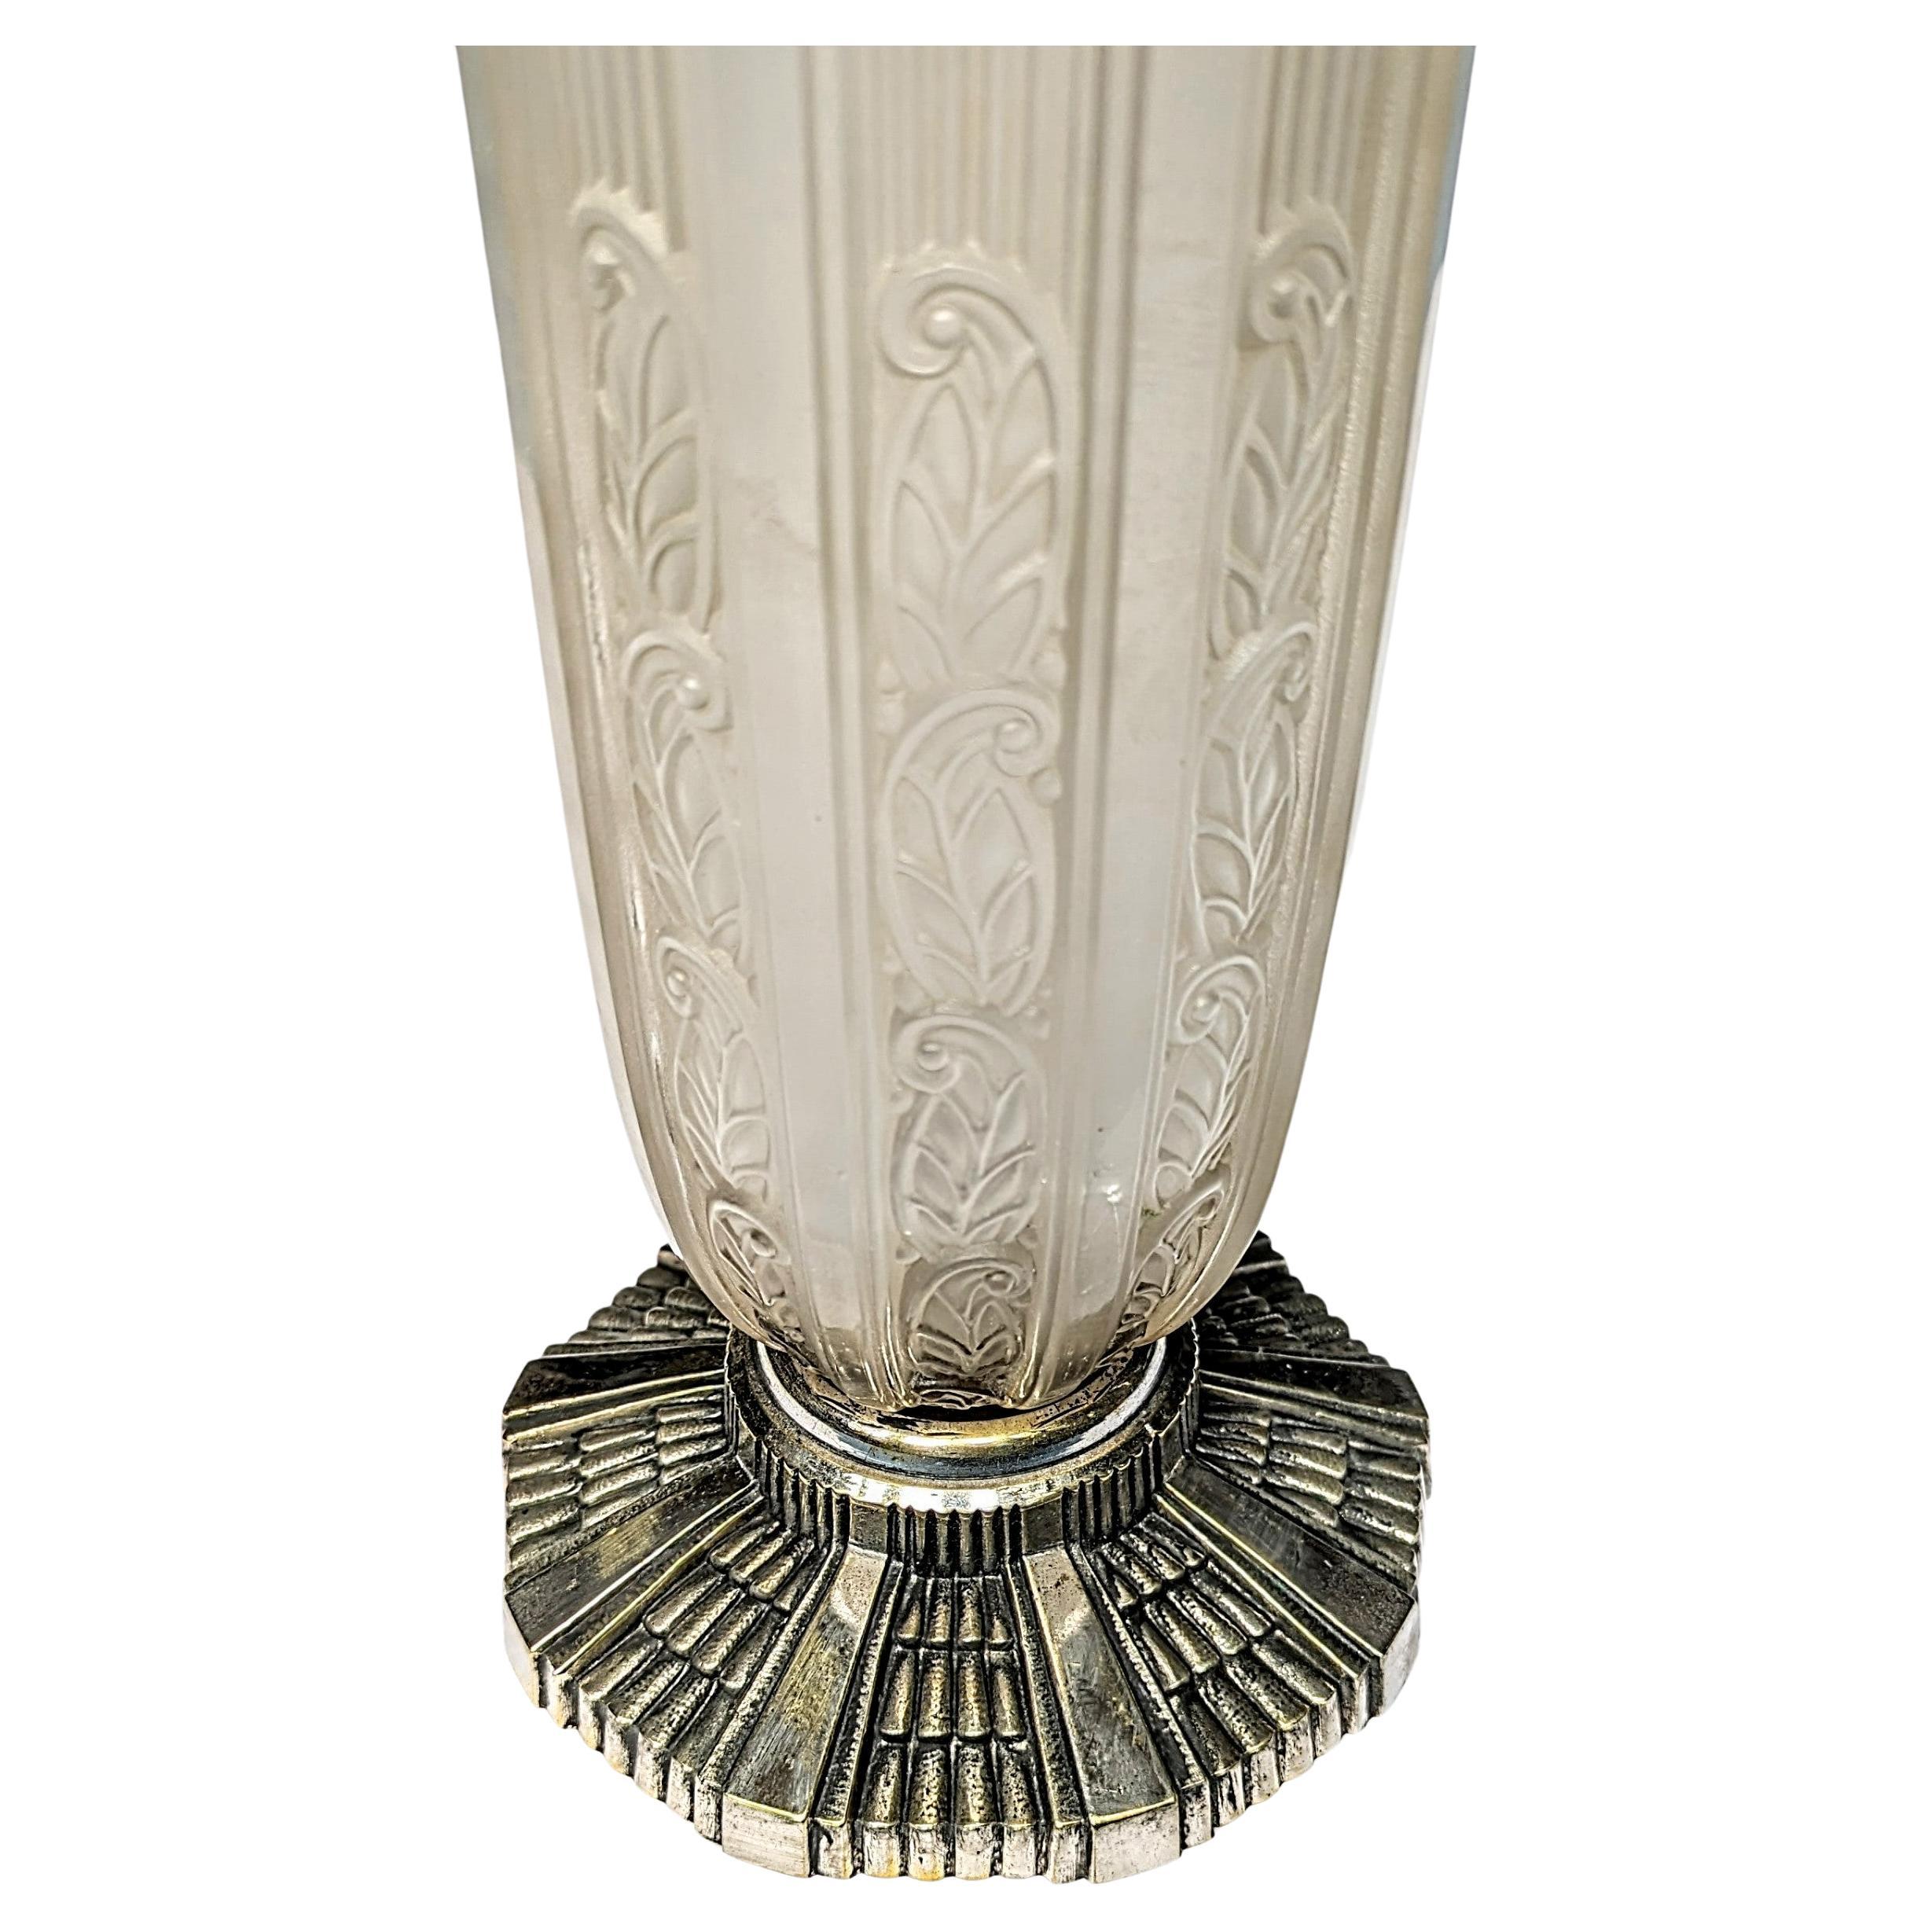 French Art Deco Glass Vase by Hettier & Vincent In Good Condition For Sale In Long Island City, NY